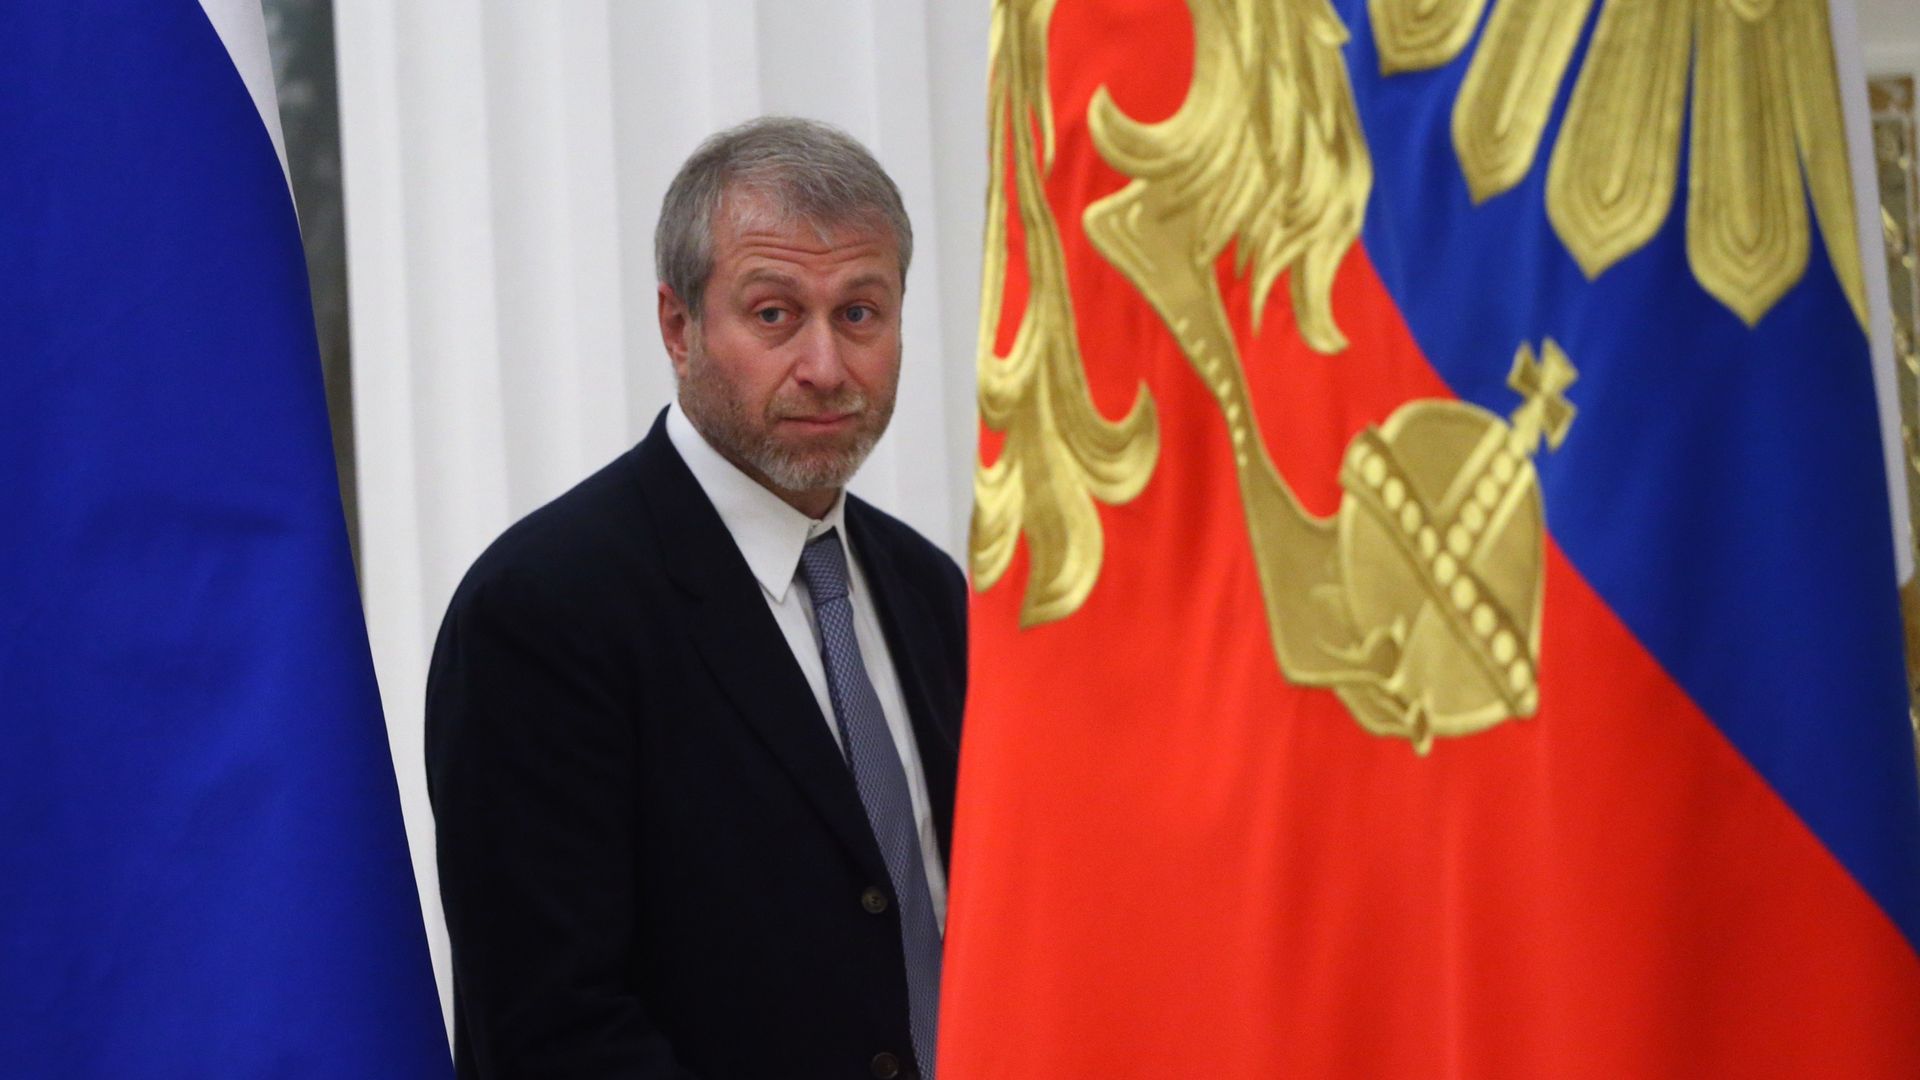 Roman Abramovich attending a meeting in the Kremlin in Moscow in December 2016.